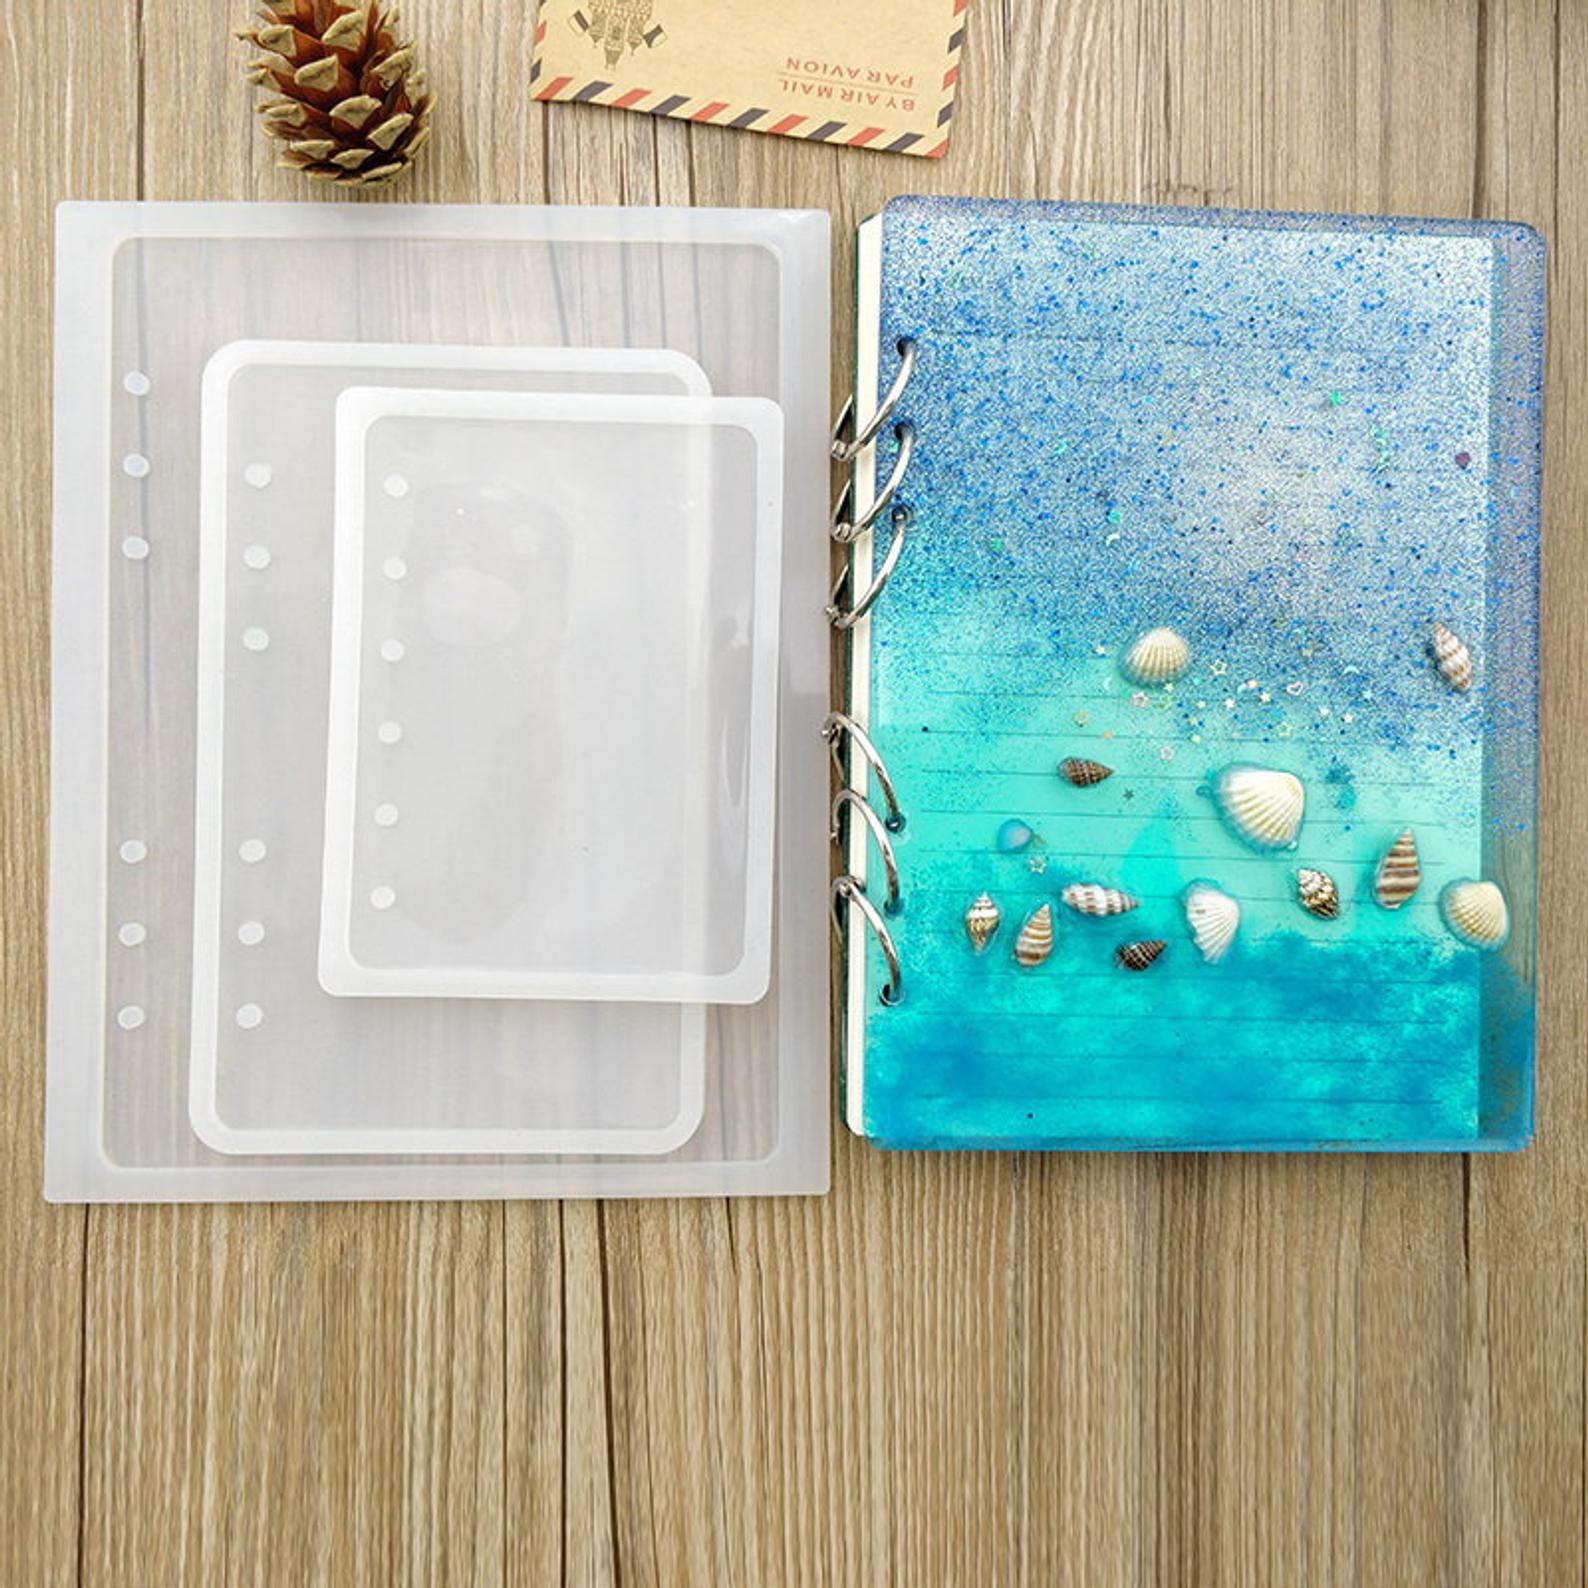 Silicone Mold Notebook cover Resin Mold Molds Silicone Molds Epoxy Diy Pendant Jewelry Making Craft Moulds jewelry diy supplies